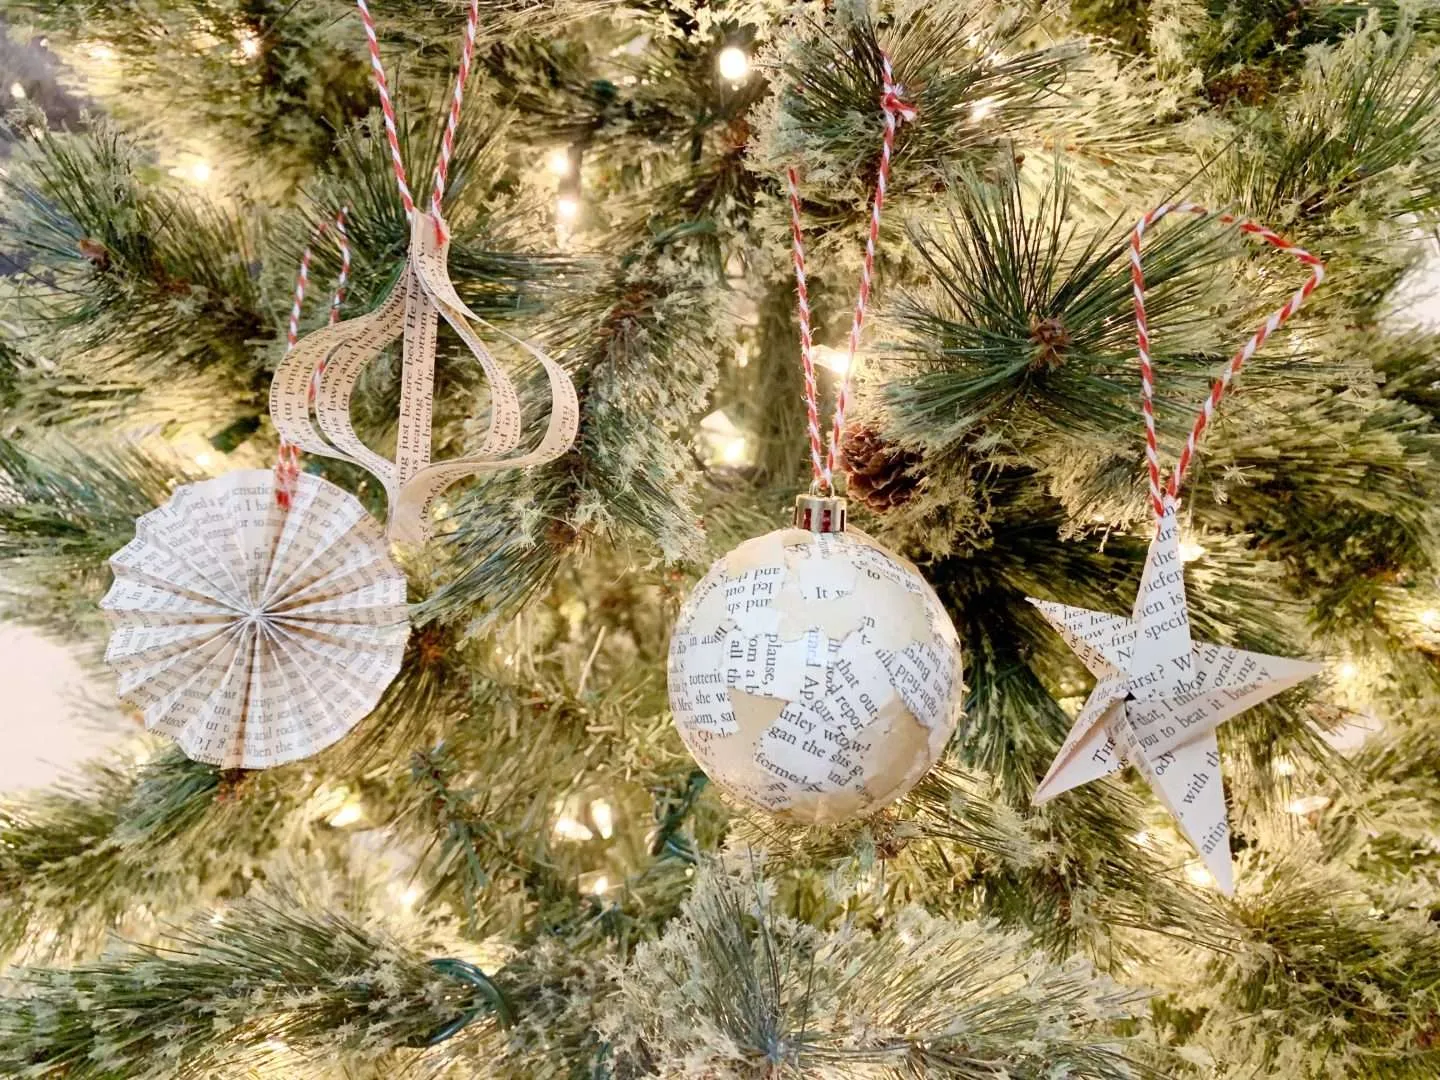 Bookish Christmas tree ornaments made from vintage book pages.